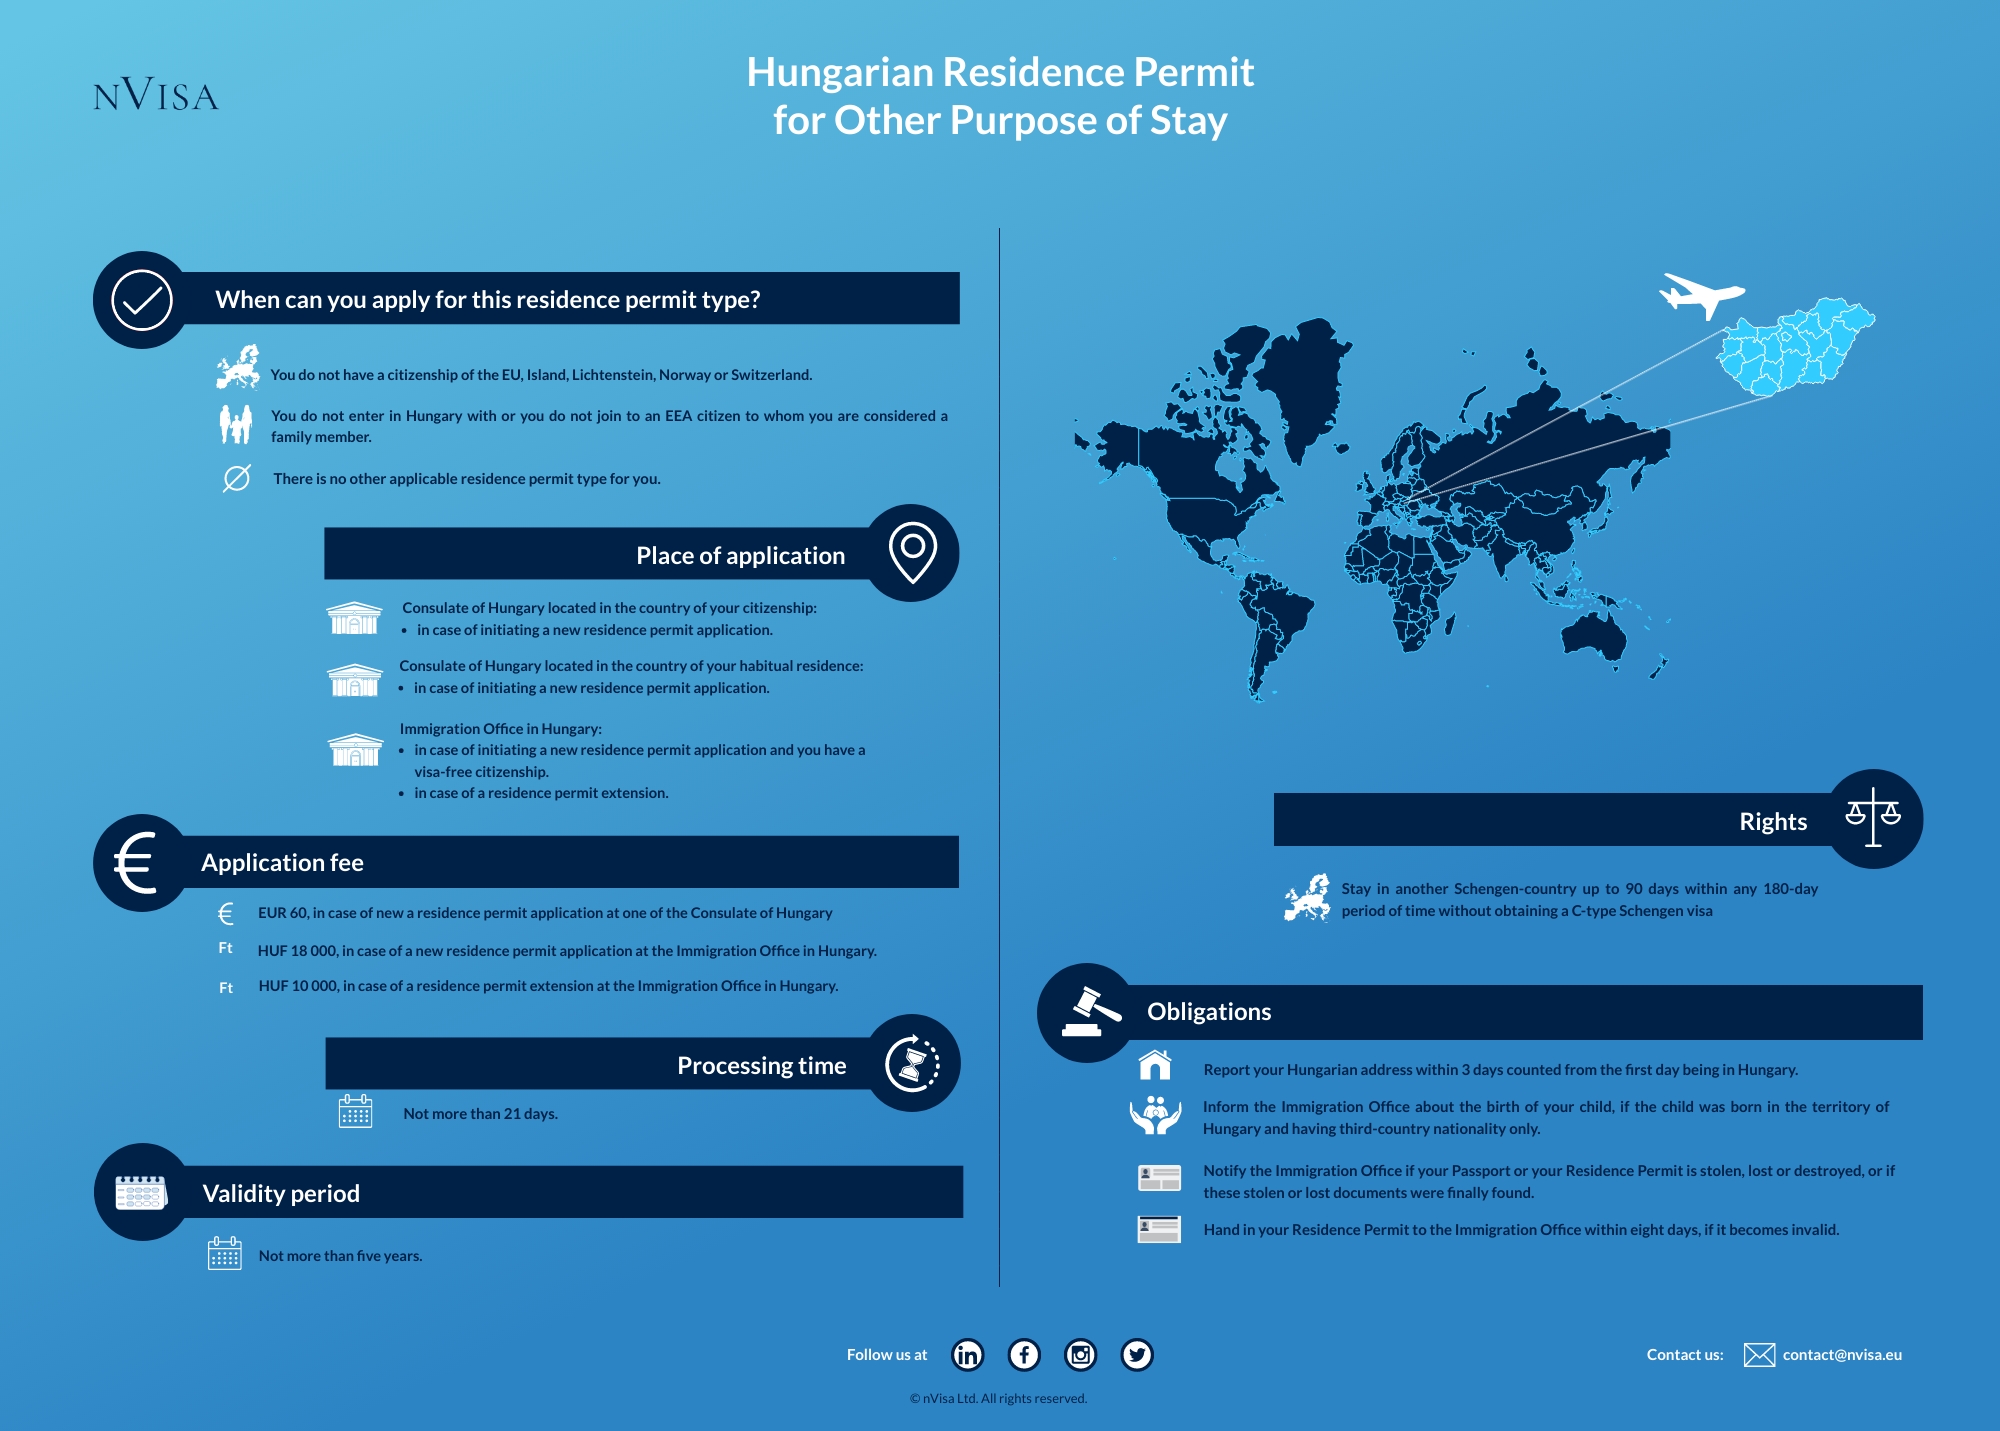 Infographic about immigration requirements and the details about obtaining a Residence Permit for Other Purpose in Hungary.